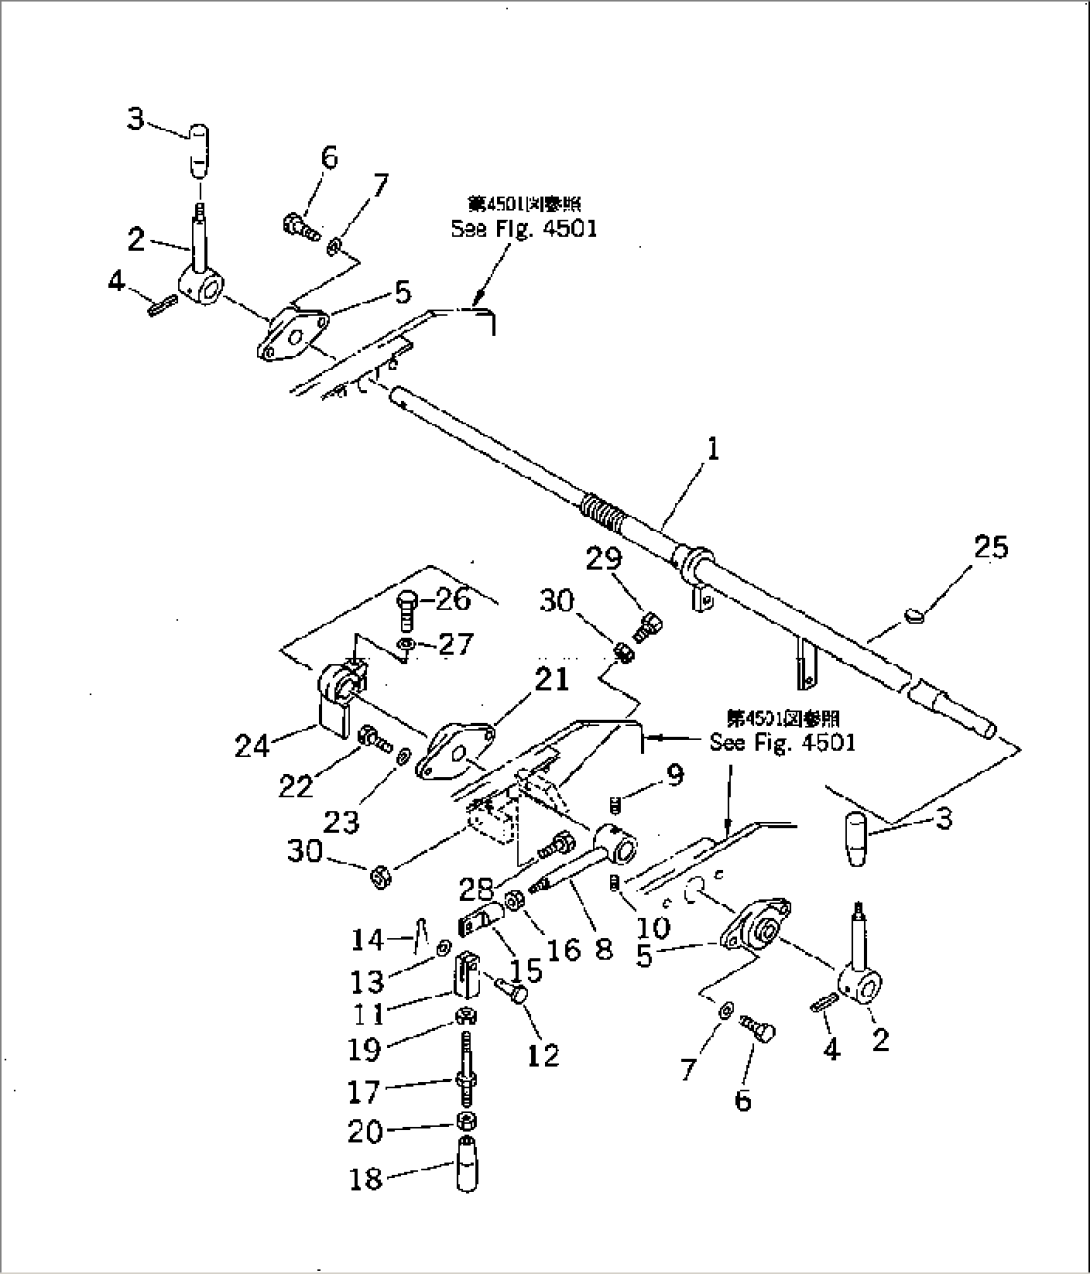 ROTOR REVOLUTION CONTROL (1/3) (LEVER AND LINKAGE)